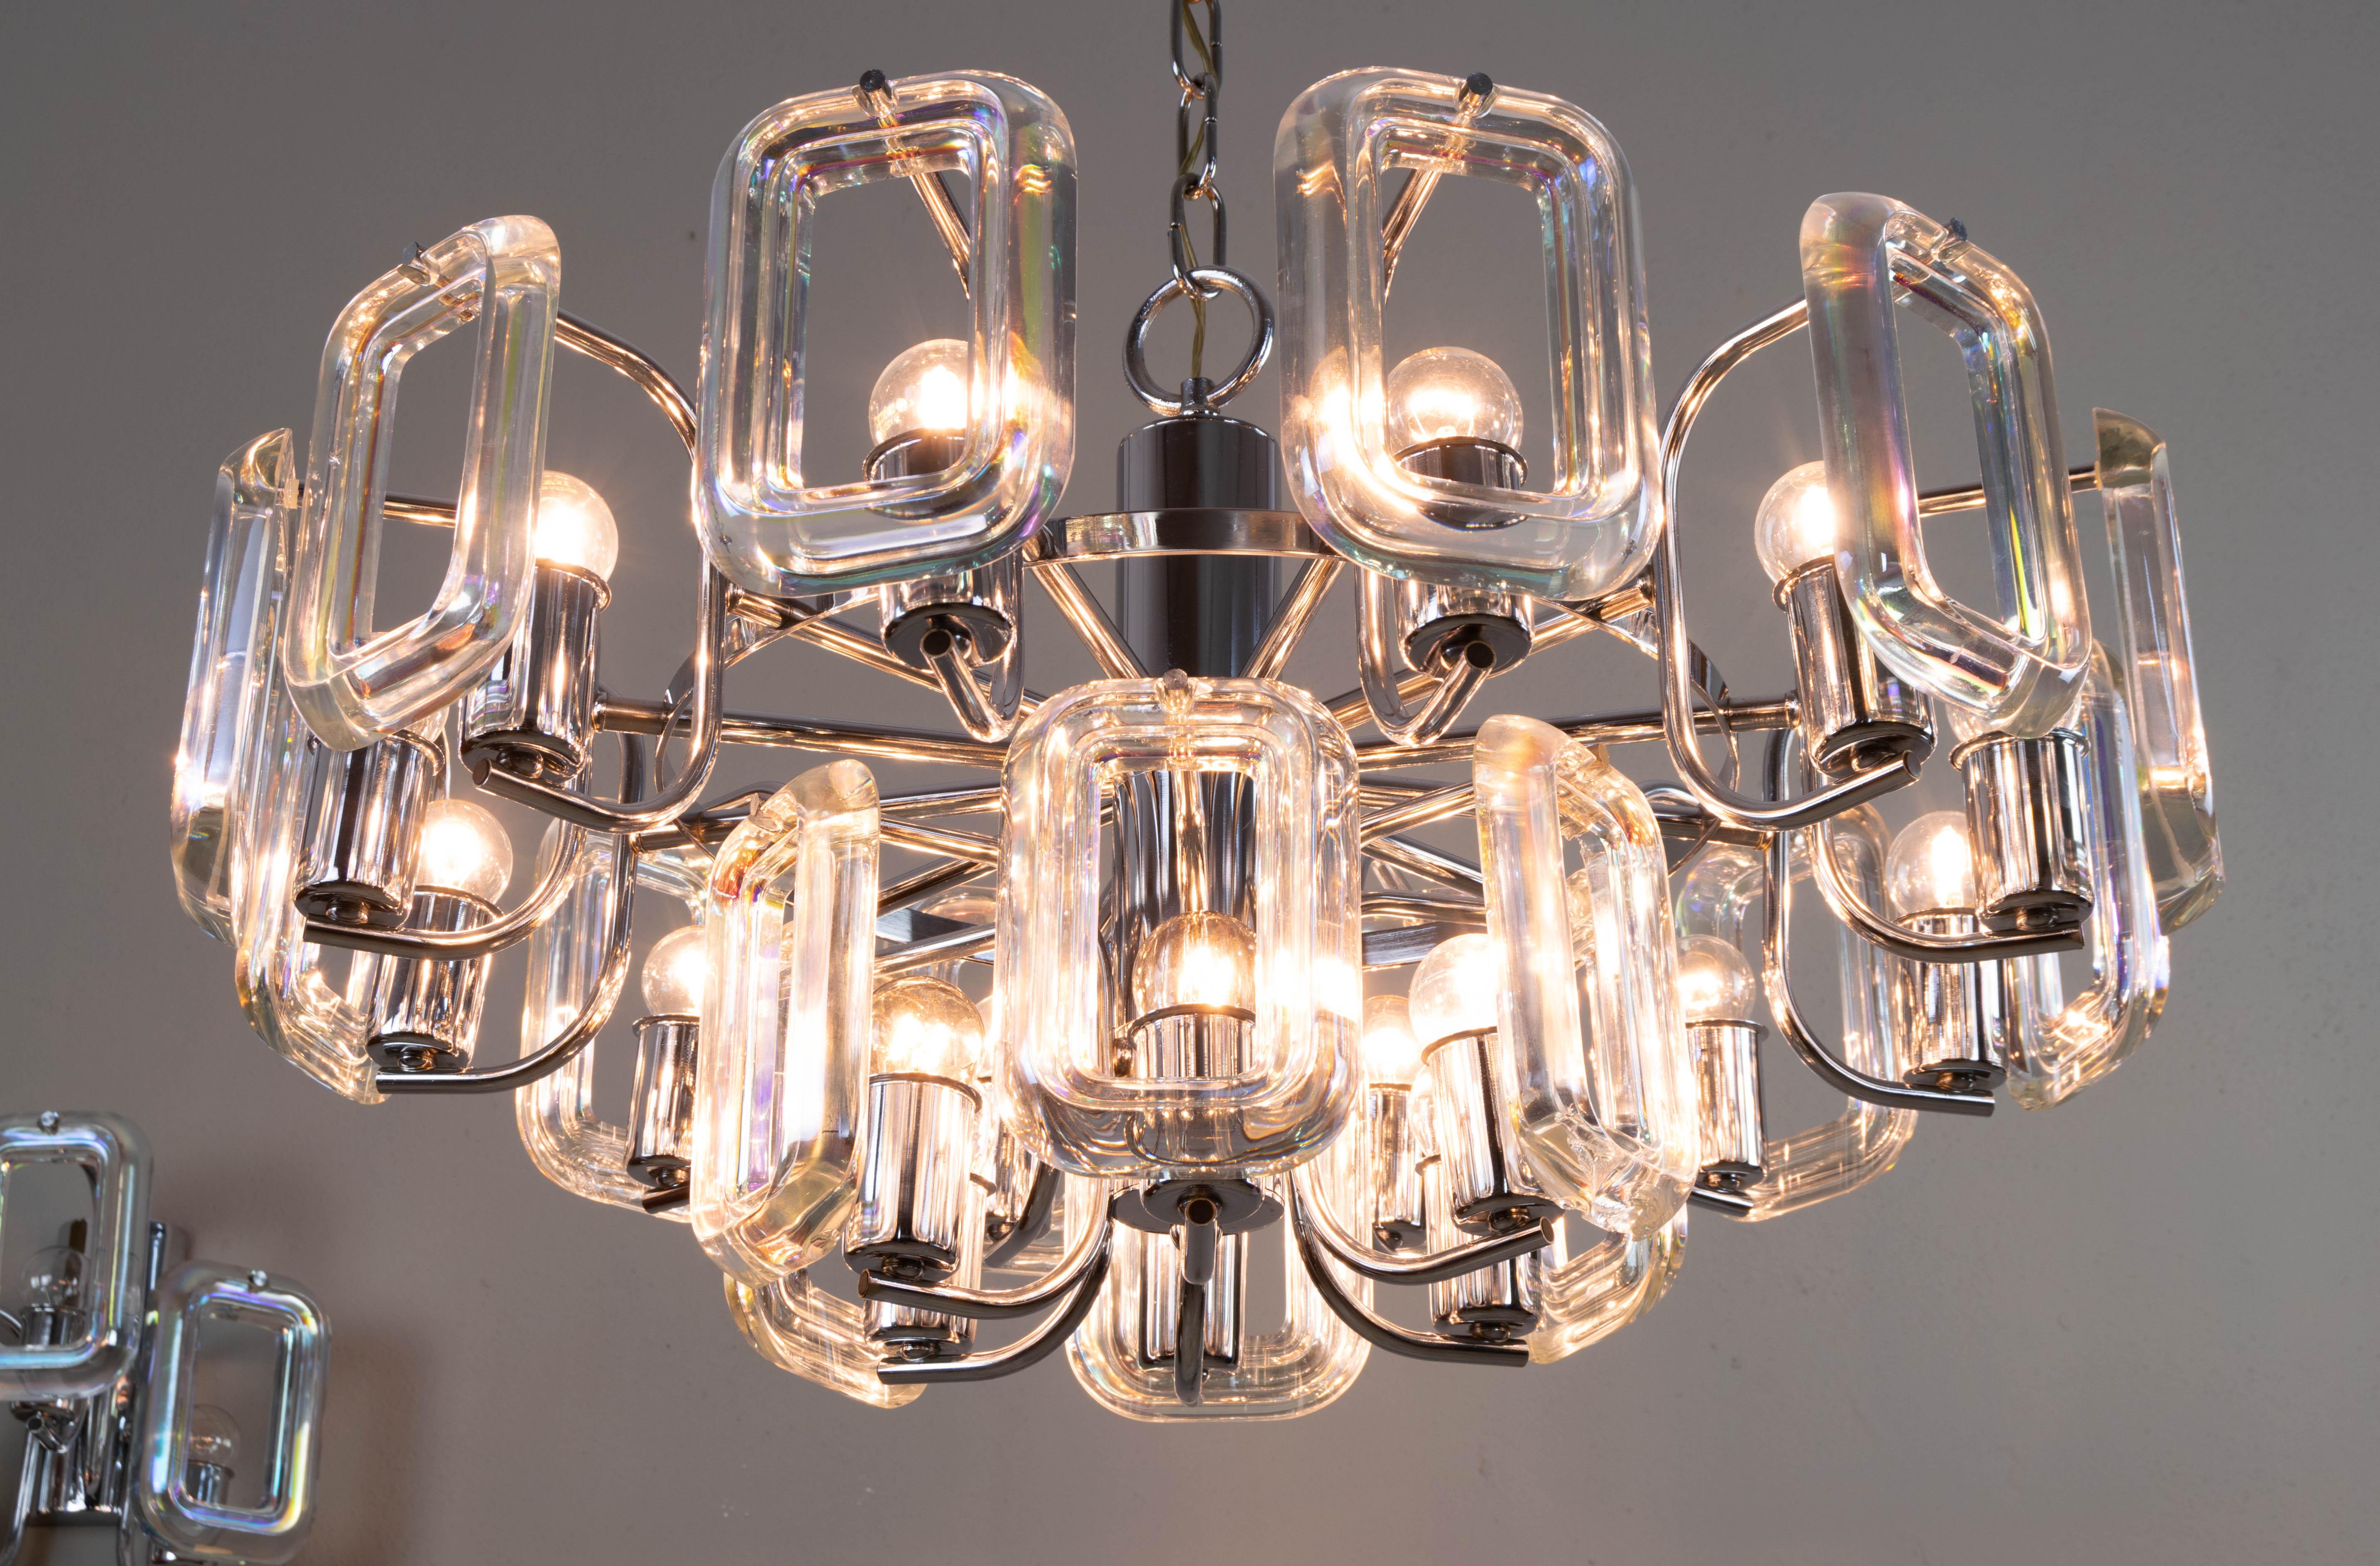 Mid-Century Modern Large Set of Chandelier and Sconces of Italian Modern Iridescent Glass Links